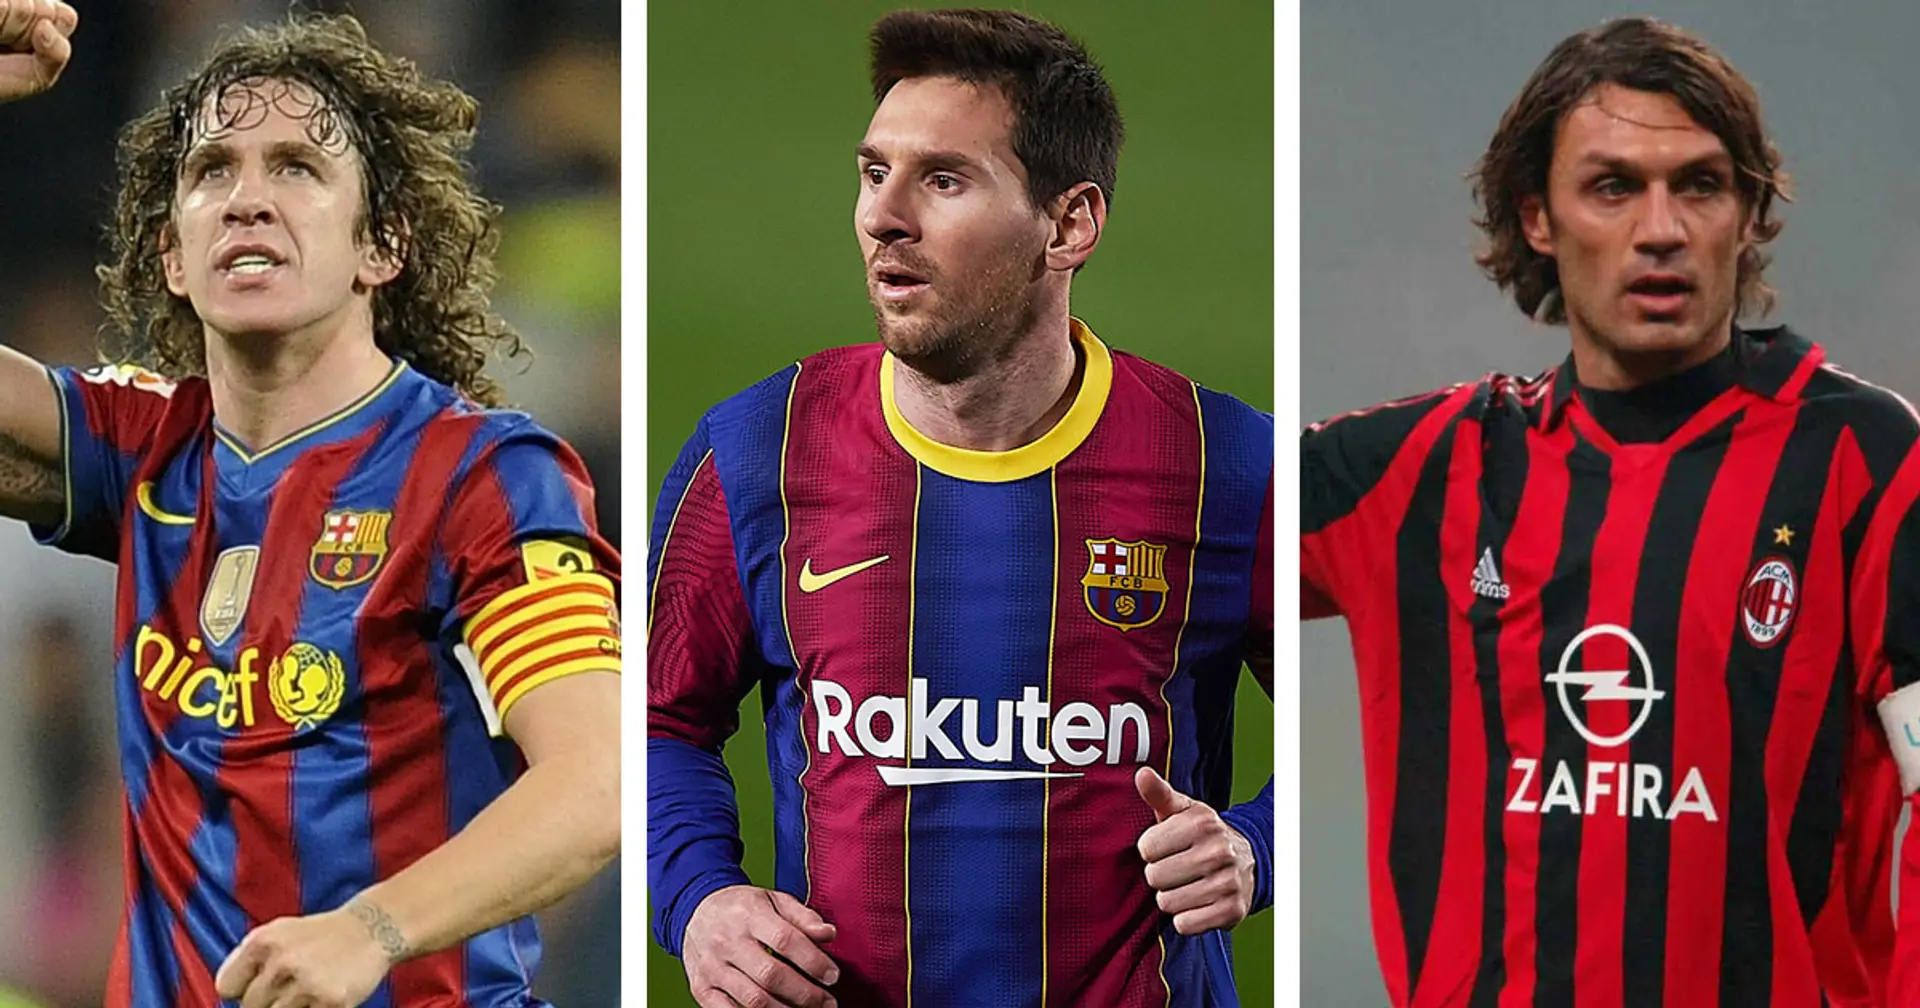 8 football legends Leo Messi will share 'one-club man' title with if he retires at Barca